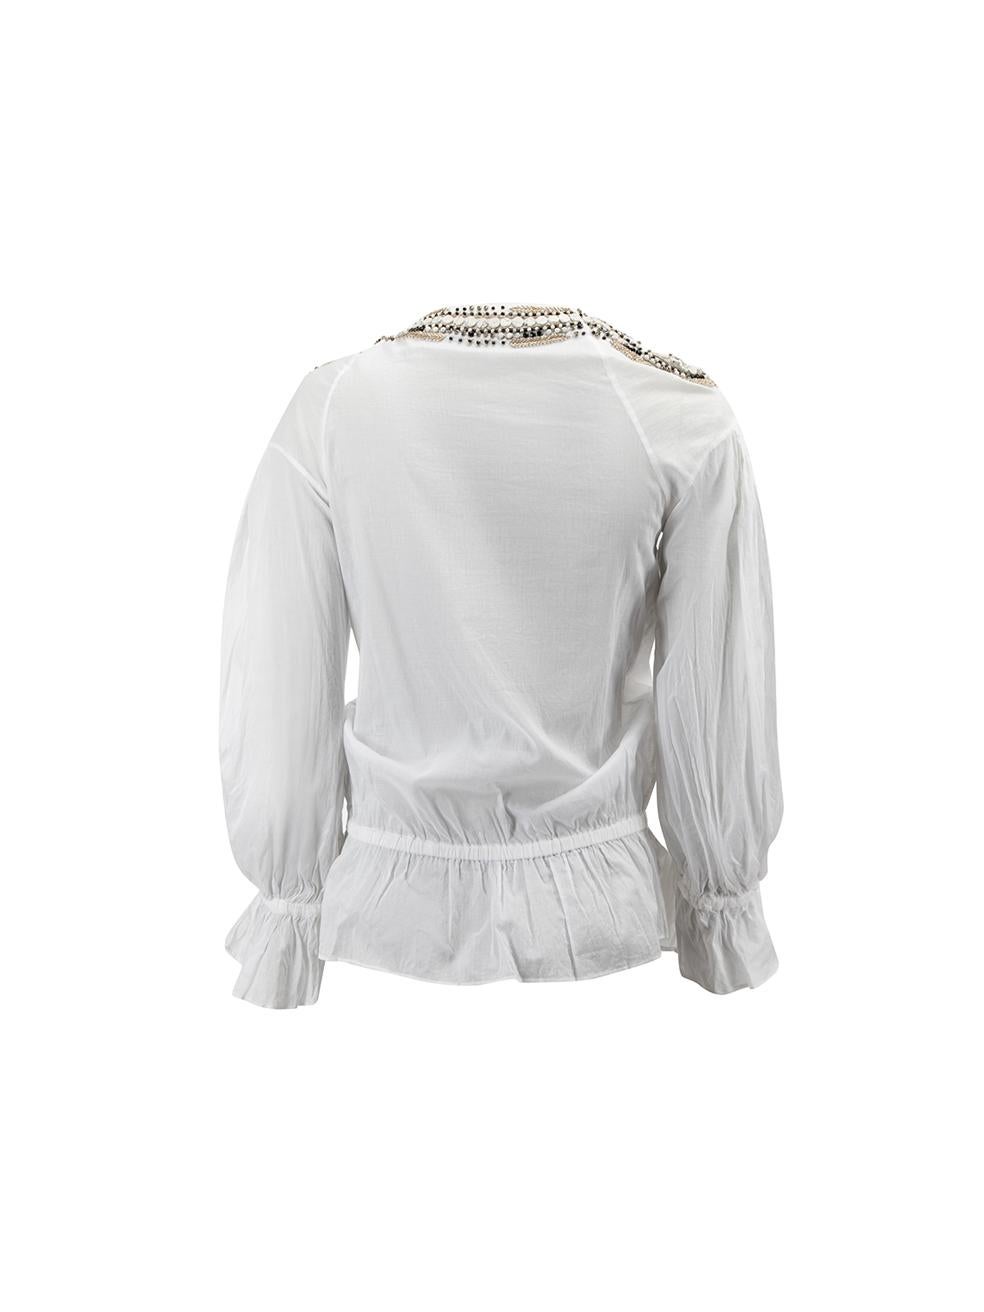 Roberto Cavalli Women's White Embellished Tie Neck Blouse In Good Condition In London, GB